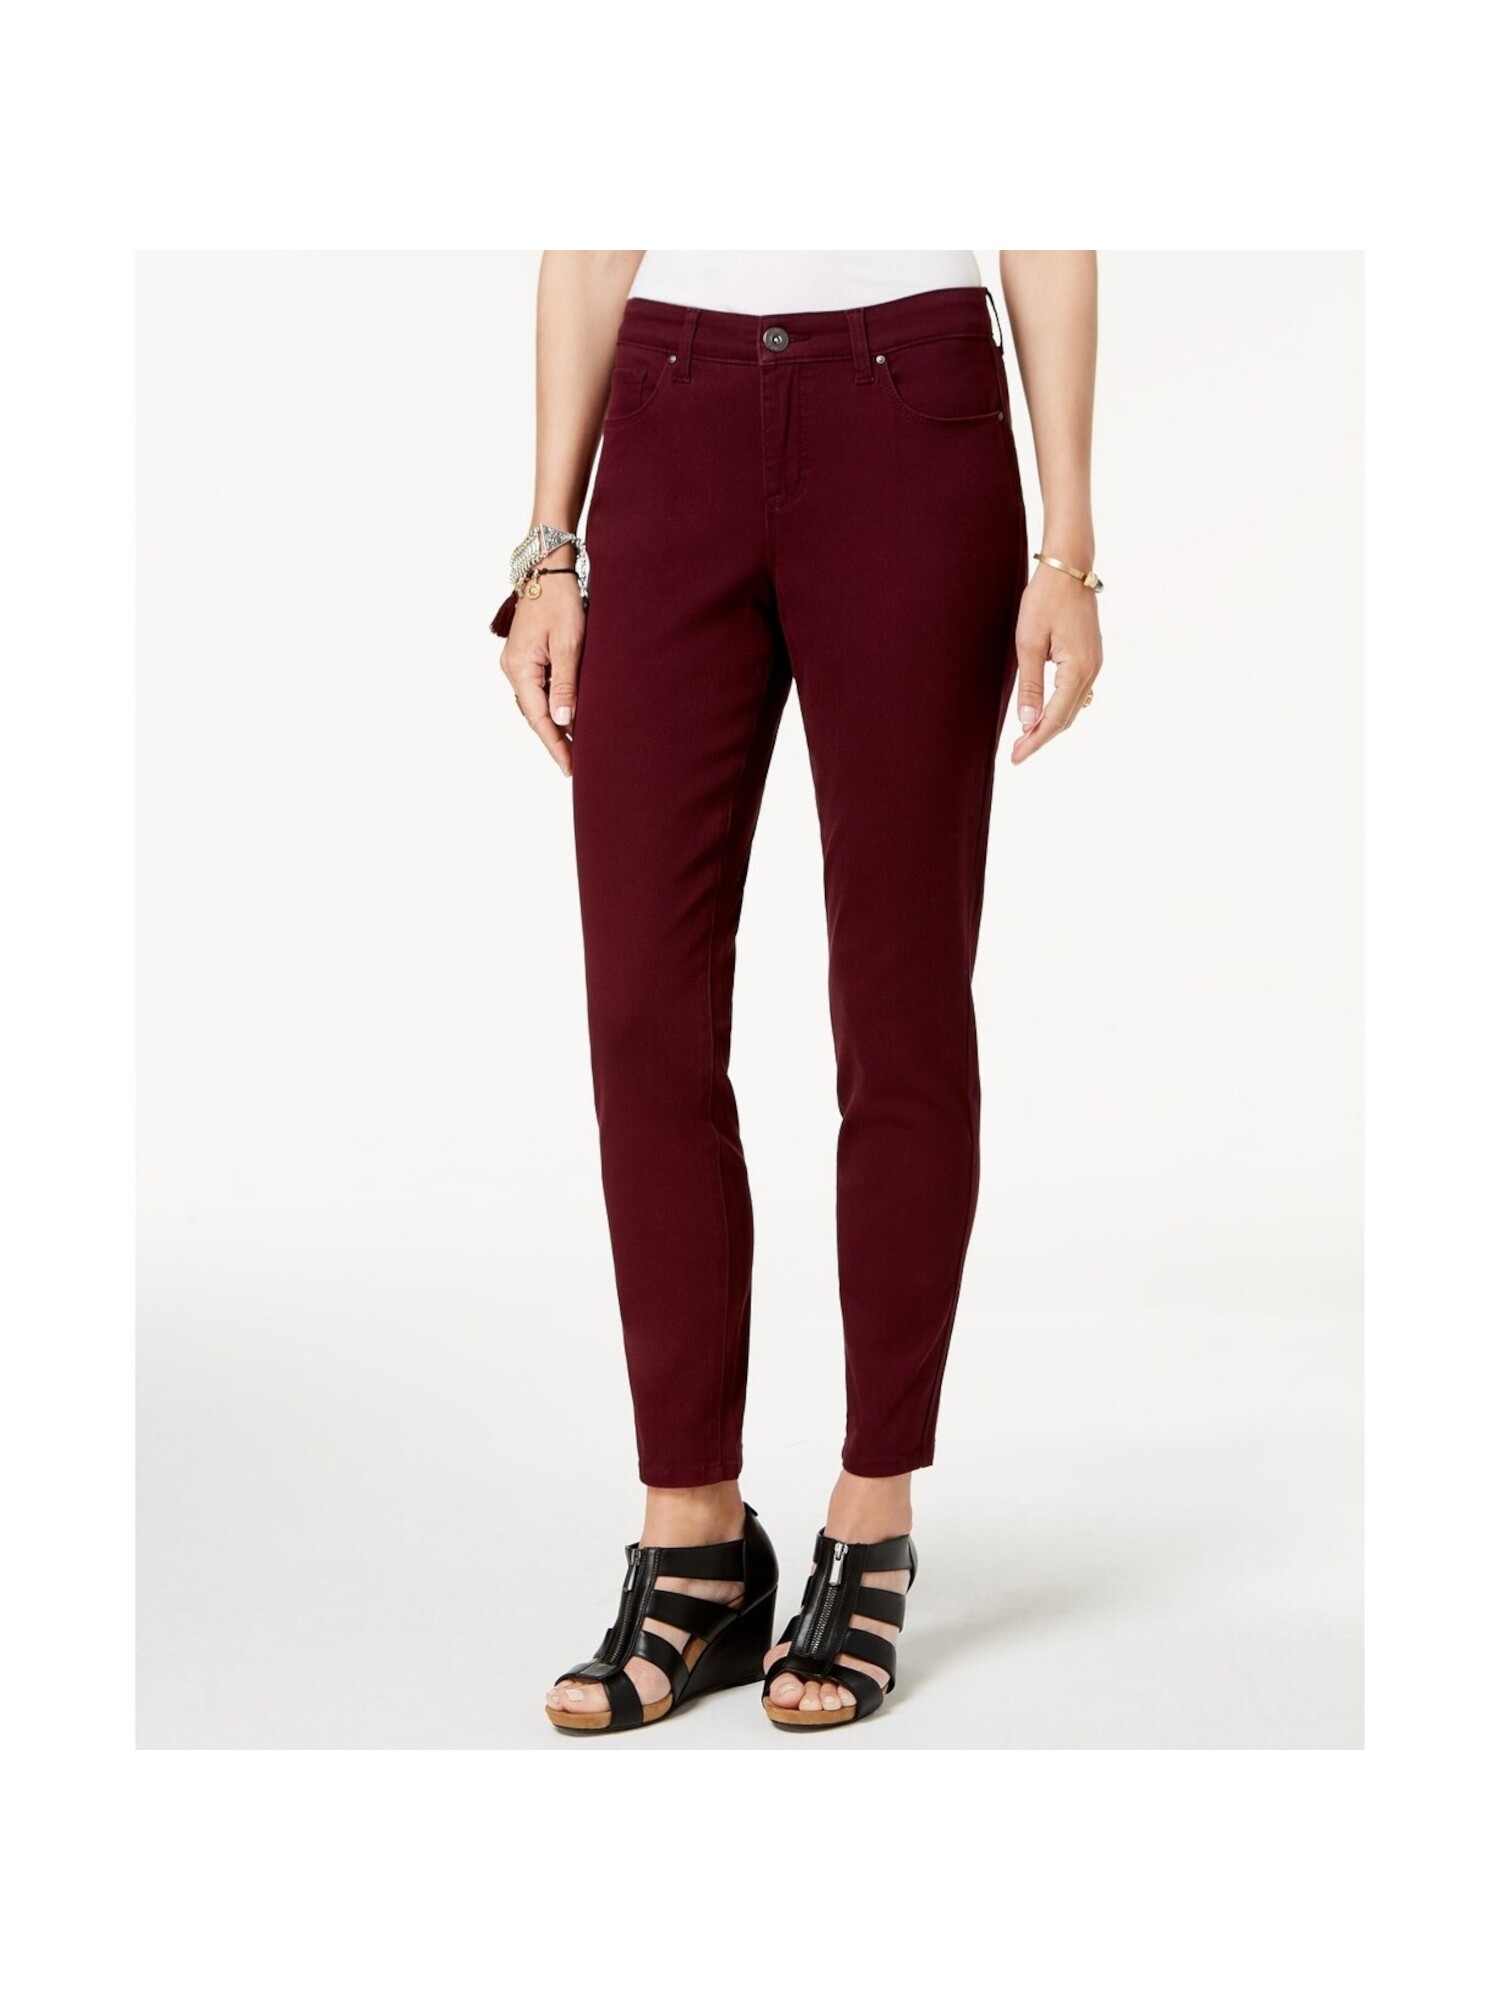 STYLE & COMPANY Womens Red Skinny Jeans 16